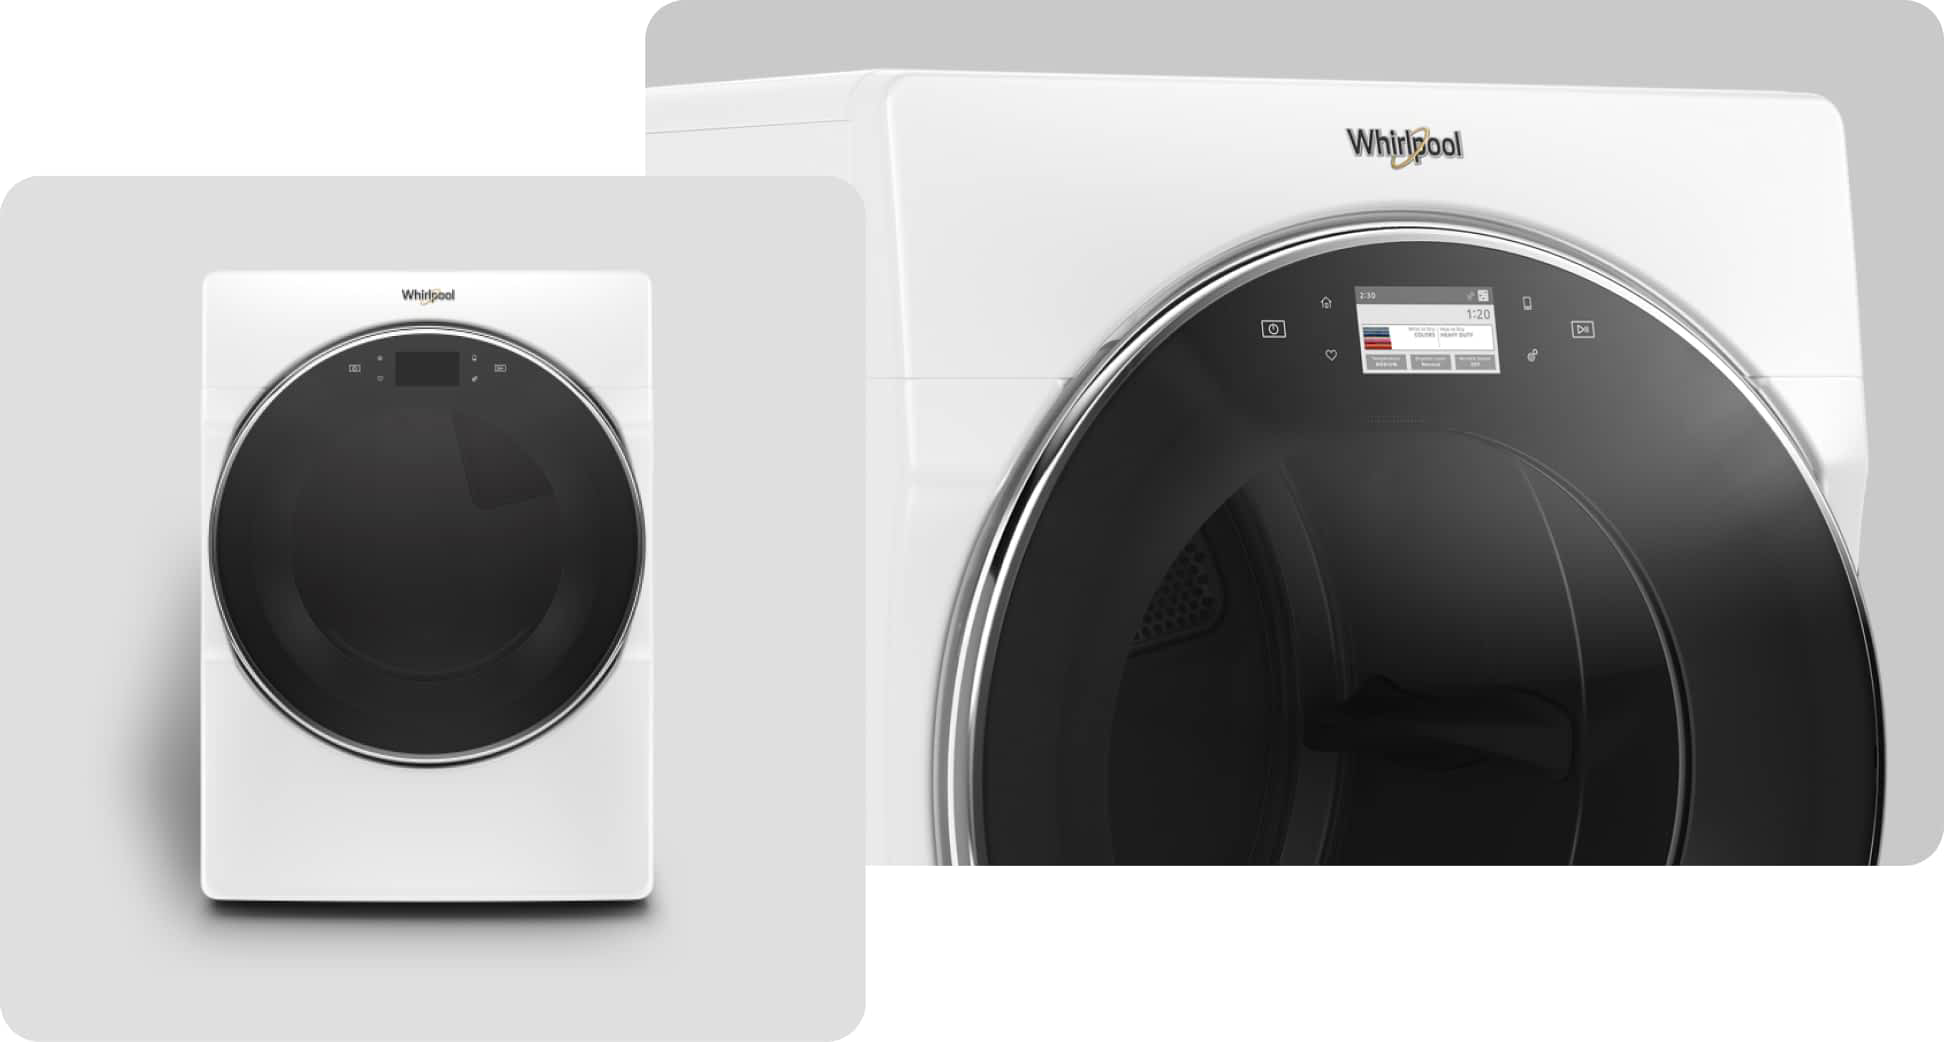 A Whirlpool® Dryer with a White finish